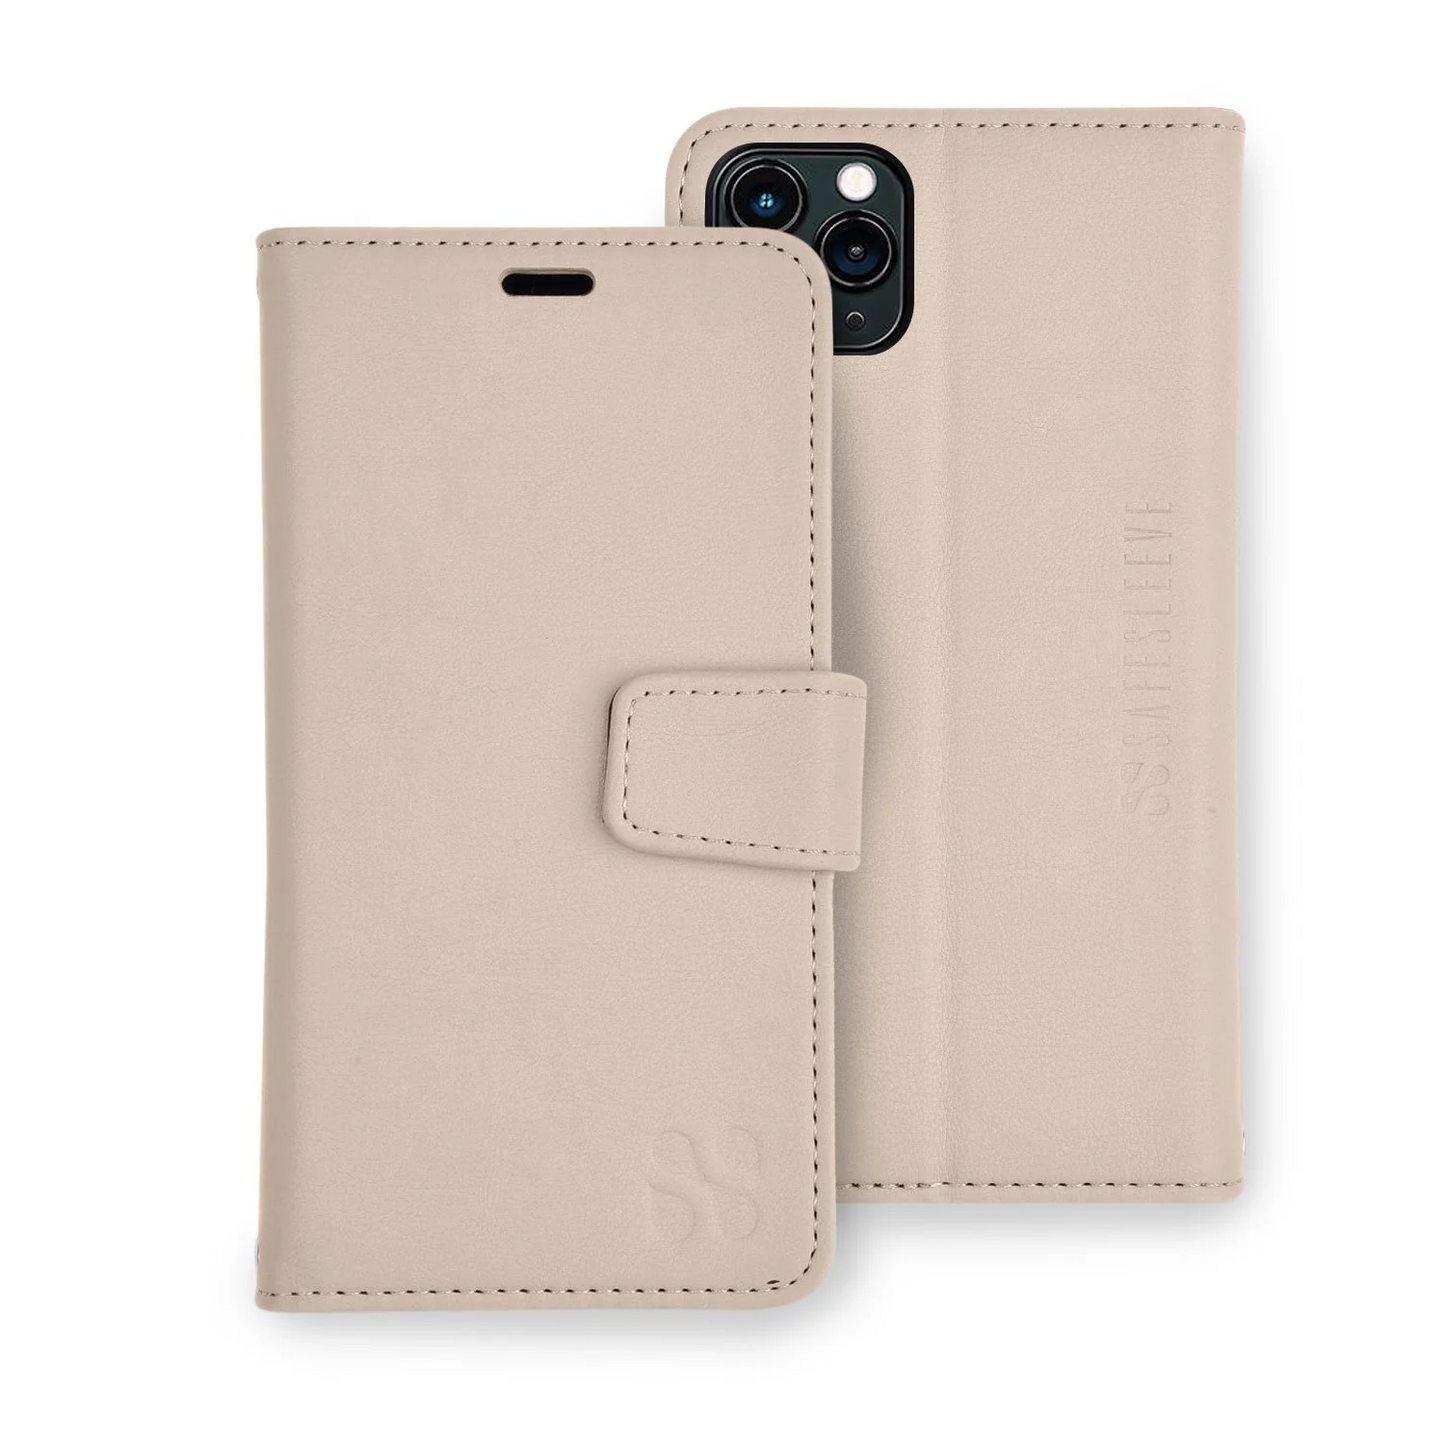 SafeSleeve for iPhone 12 and 12 Pro - Schild